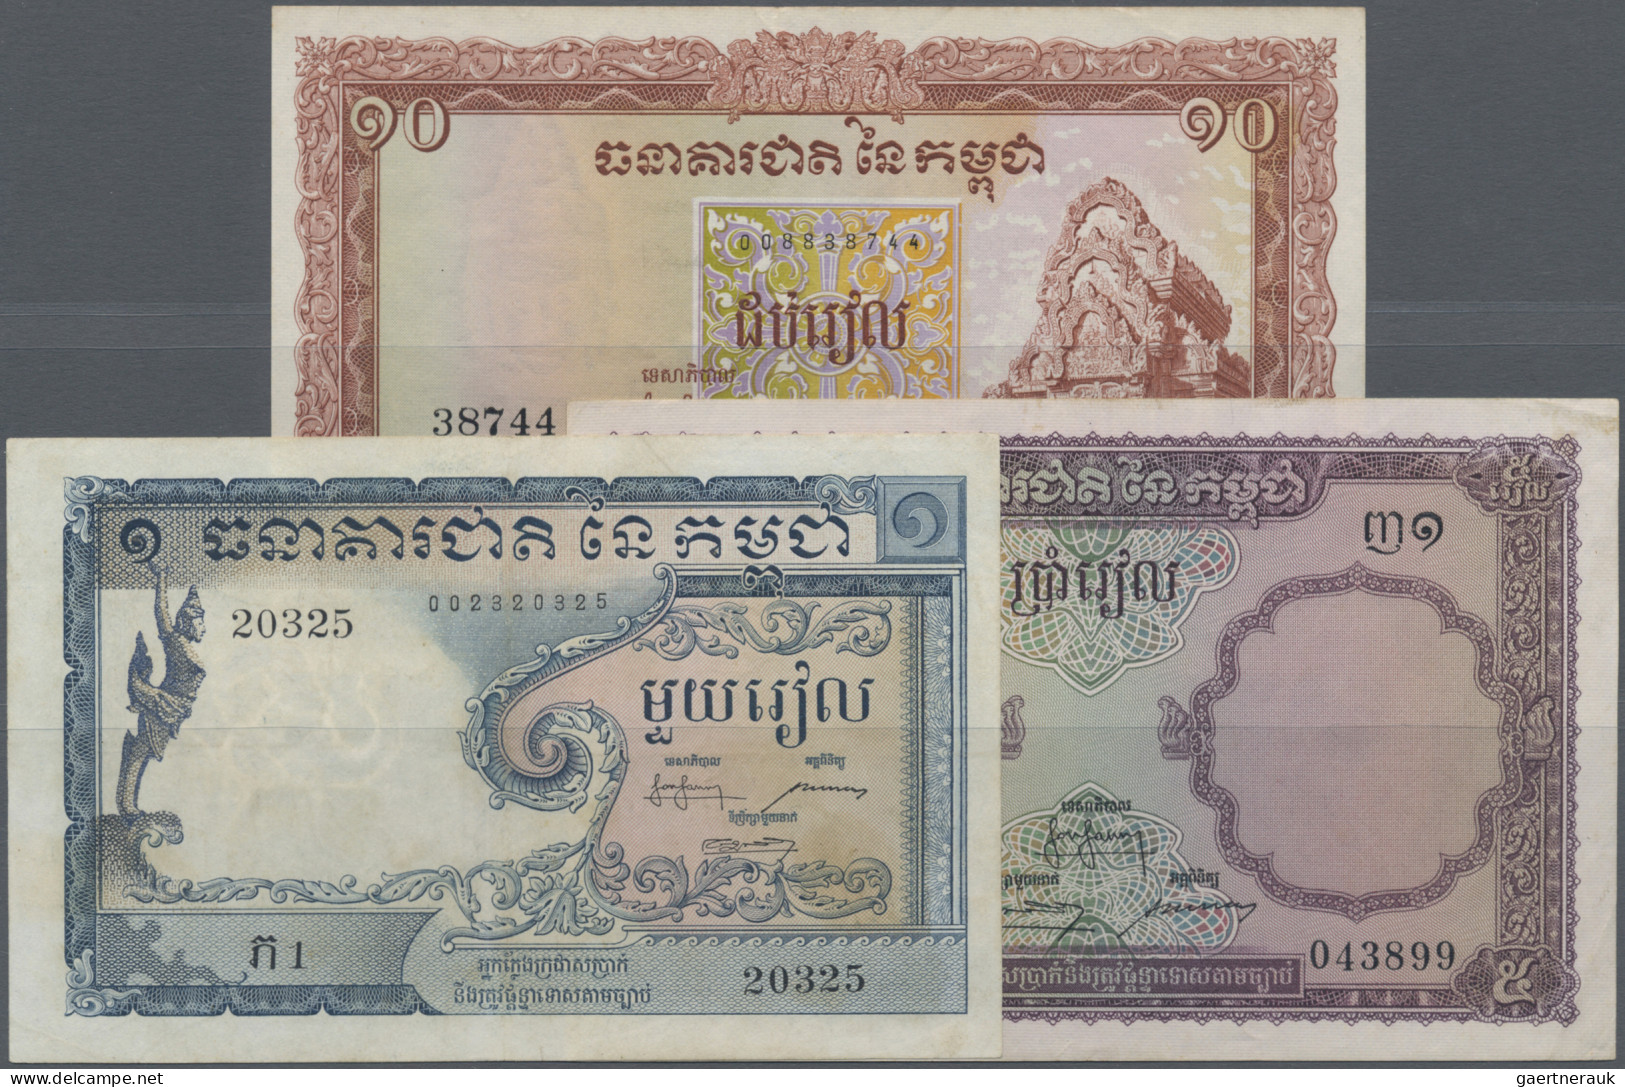 Cambodia: Banque Nationale Du Cambodge, Lot With 3 Banknotes, Series ND(1955-56) - Cambodia